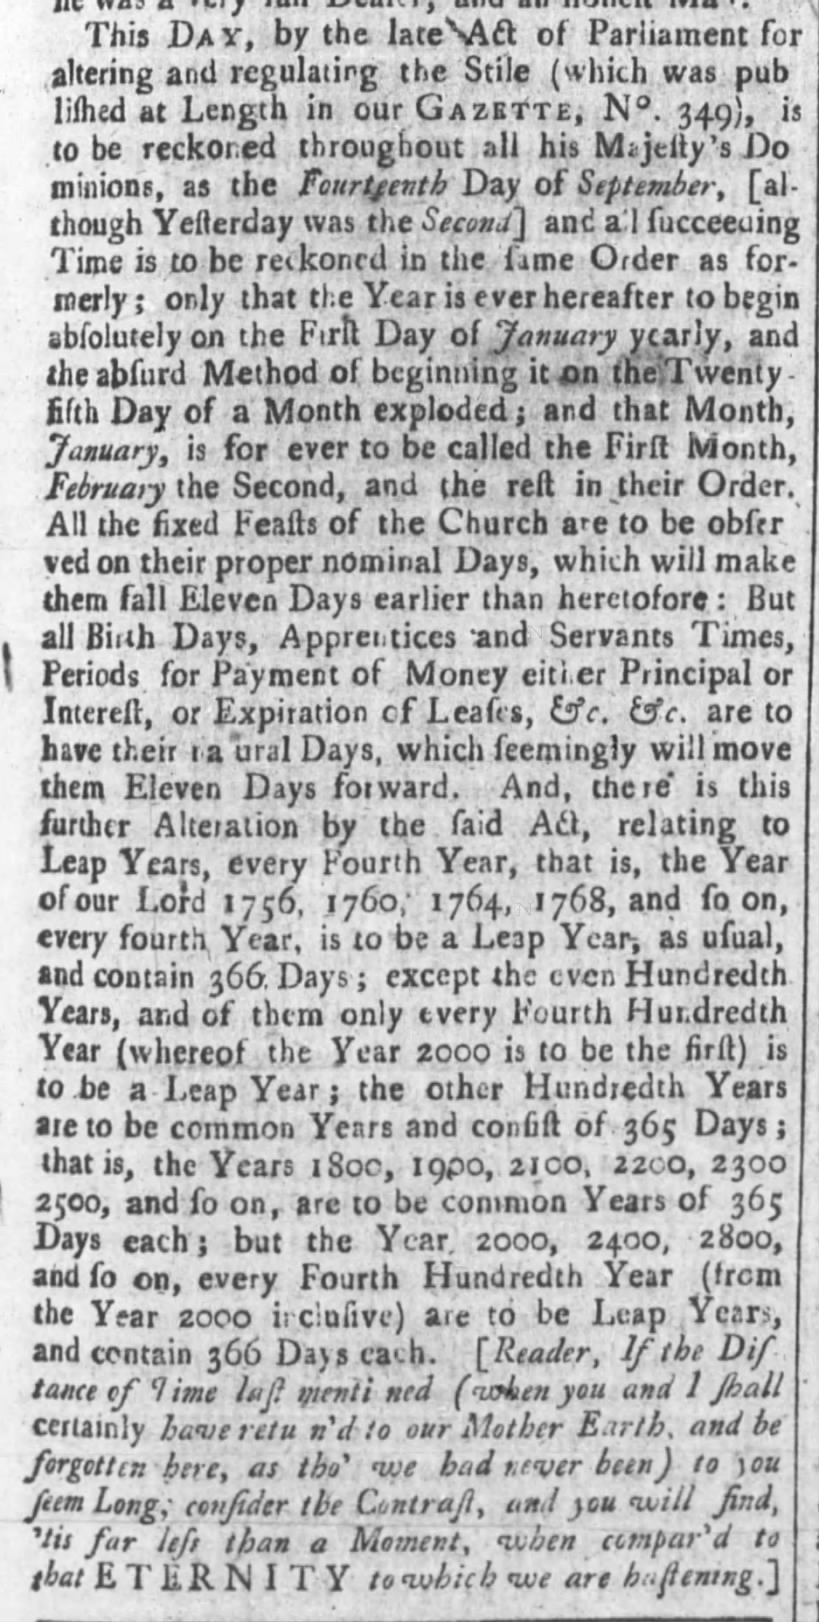 1752: Changes to the calendar including Leap Year